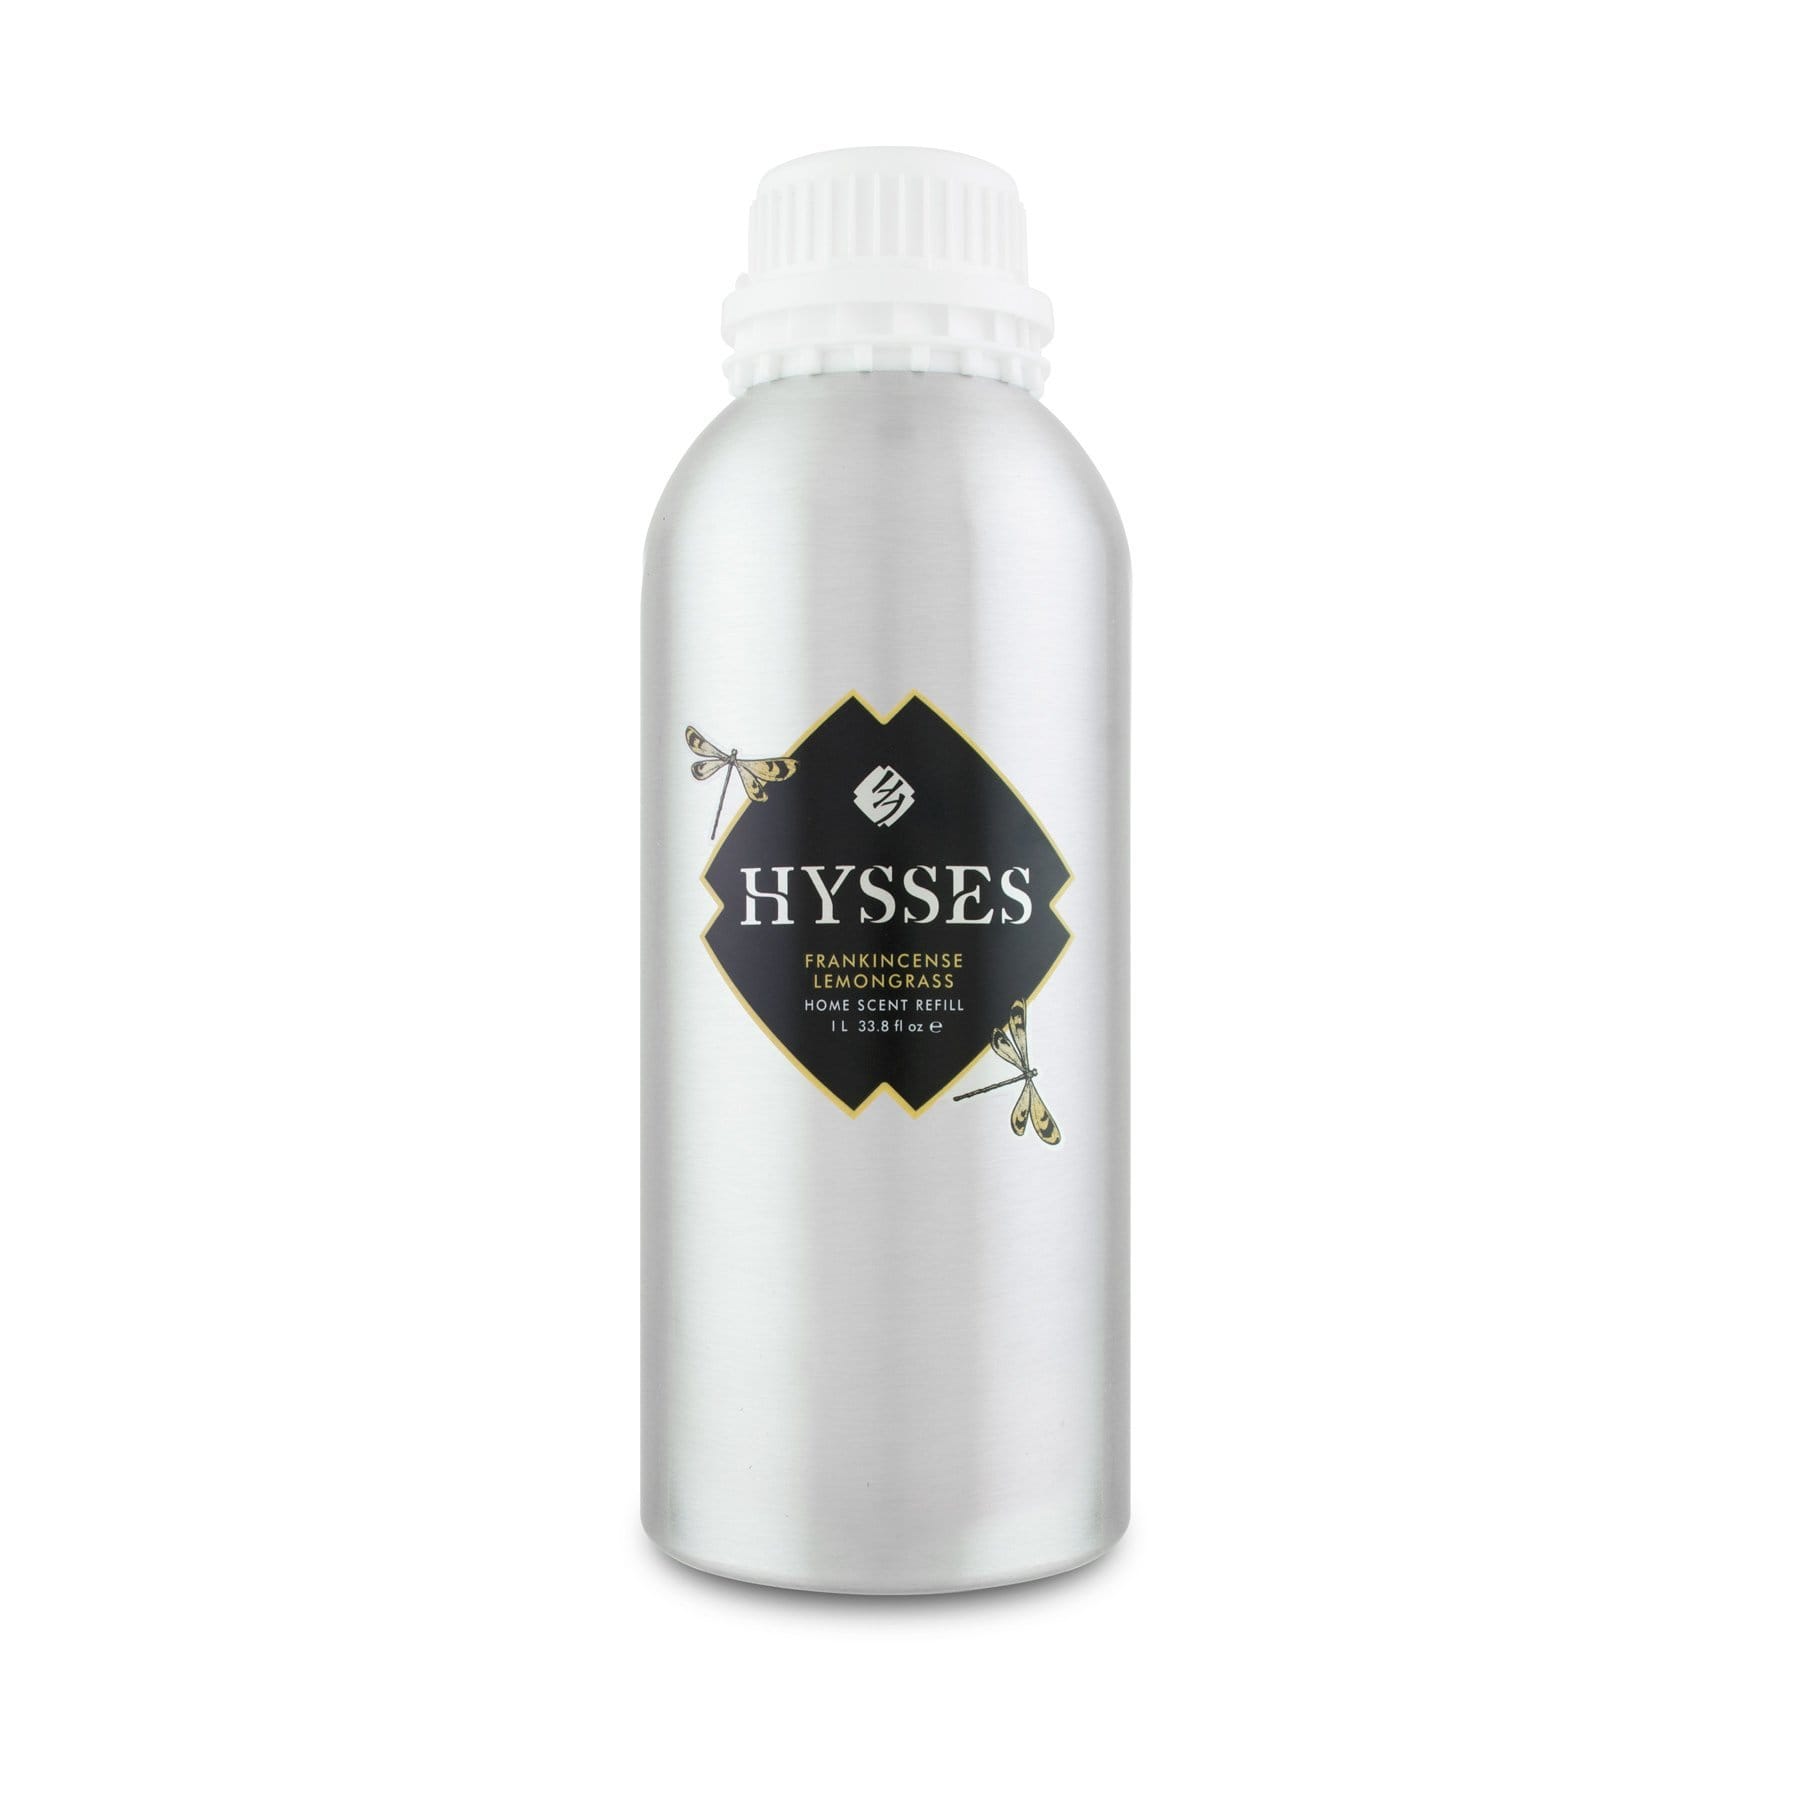 Hysses Home Scents 1000ml Refill Home Scent Frankincense Lemongrass, 1L